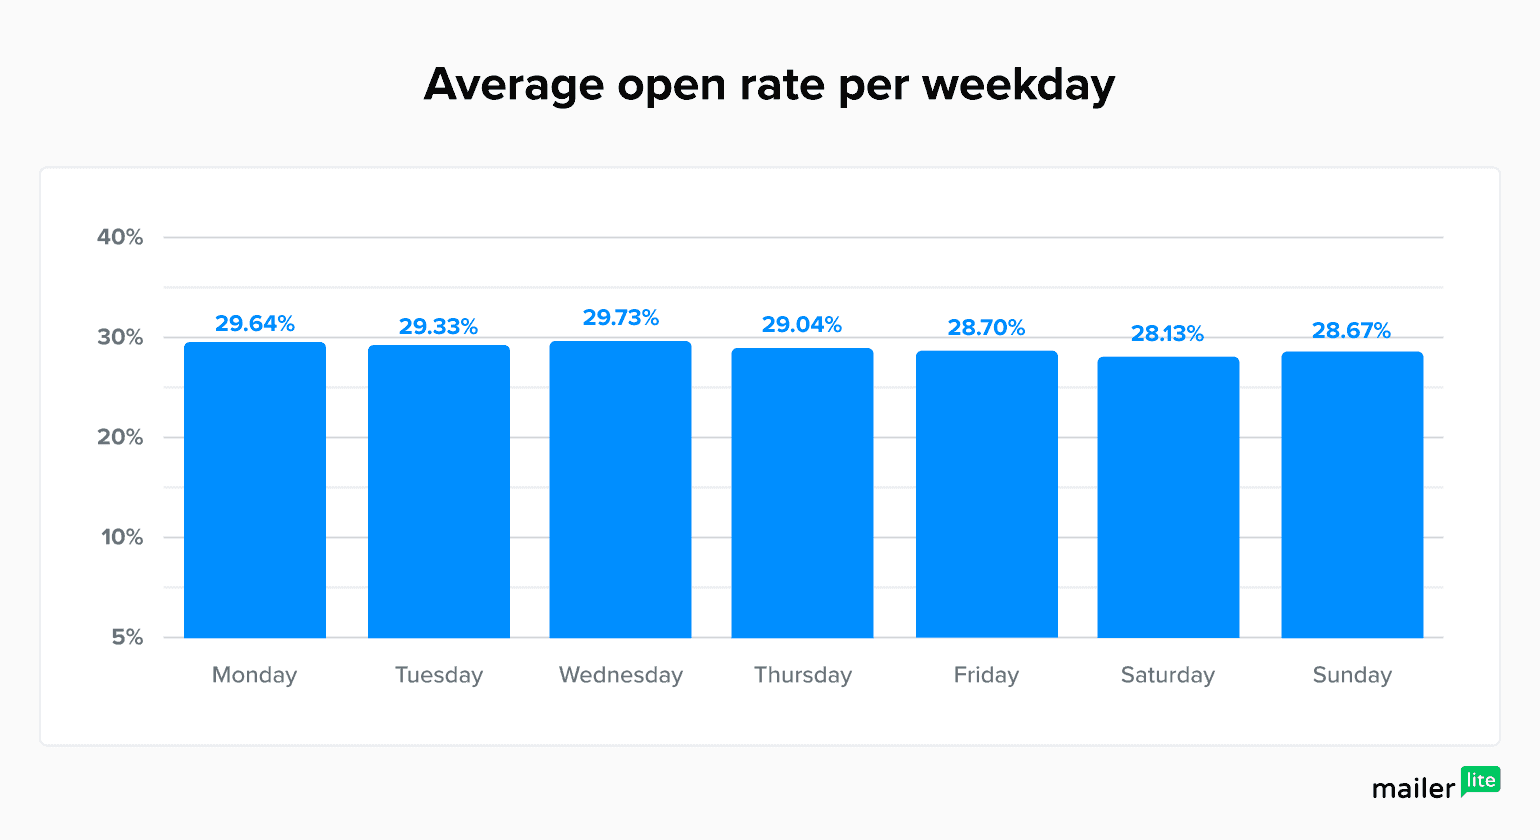 Mailerlite’s graph for average open rate per weekday